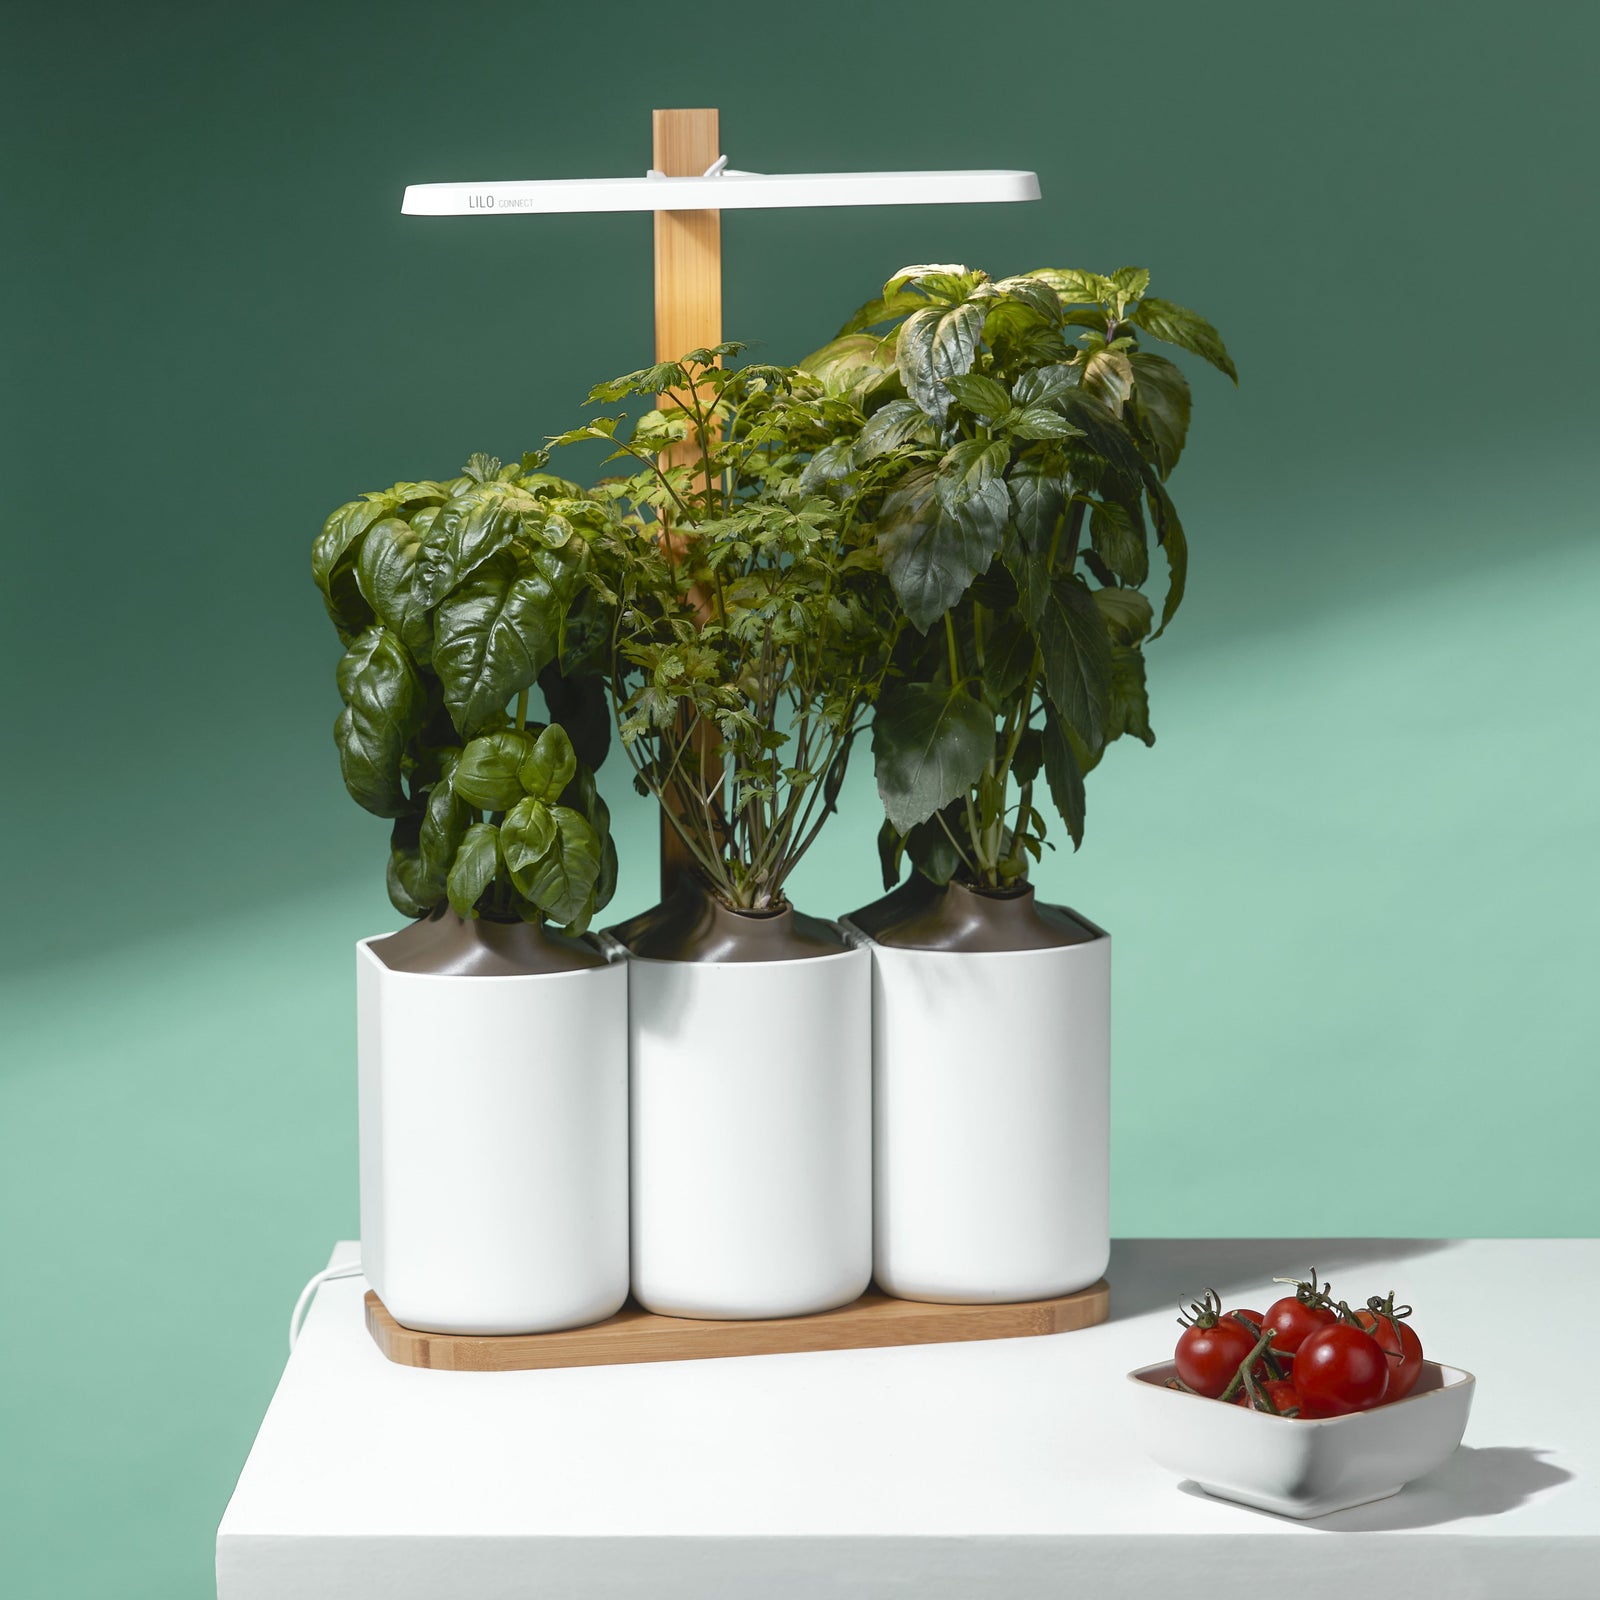 Modulo - The connected, modular and scalable indoor garden - Prêt à Pousser  🇪🇺